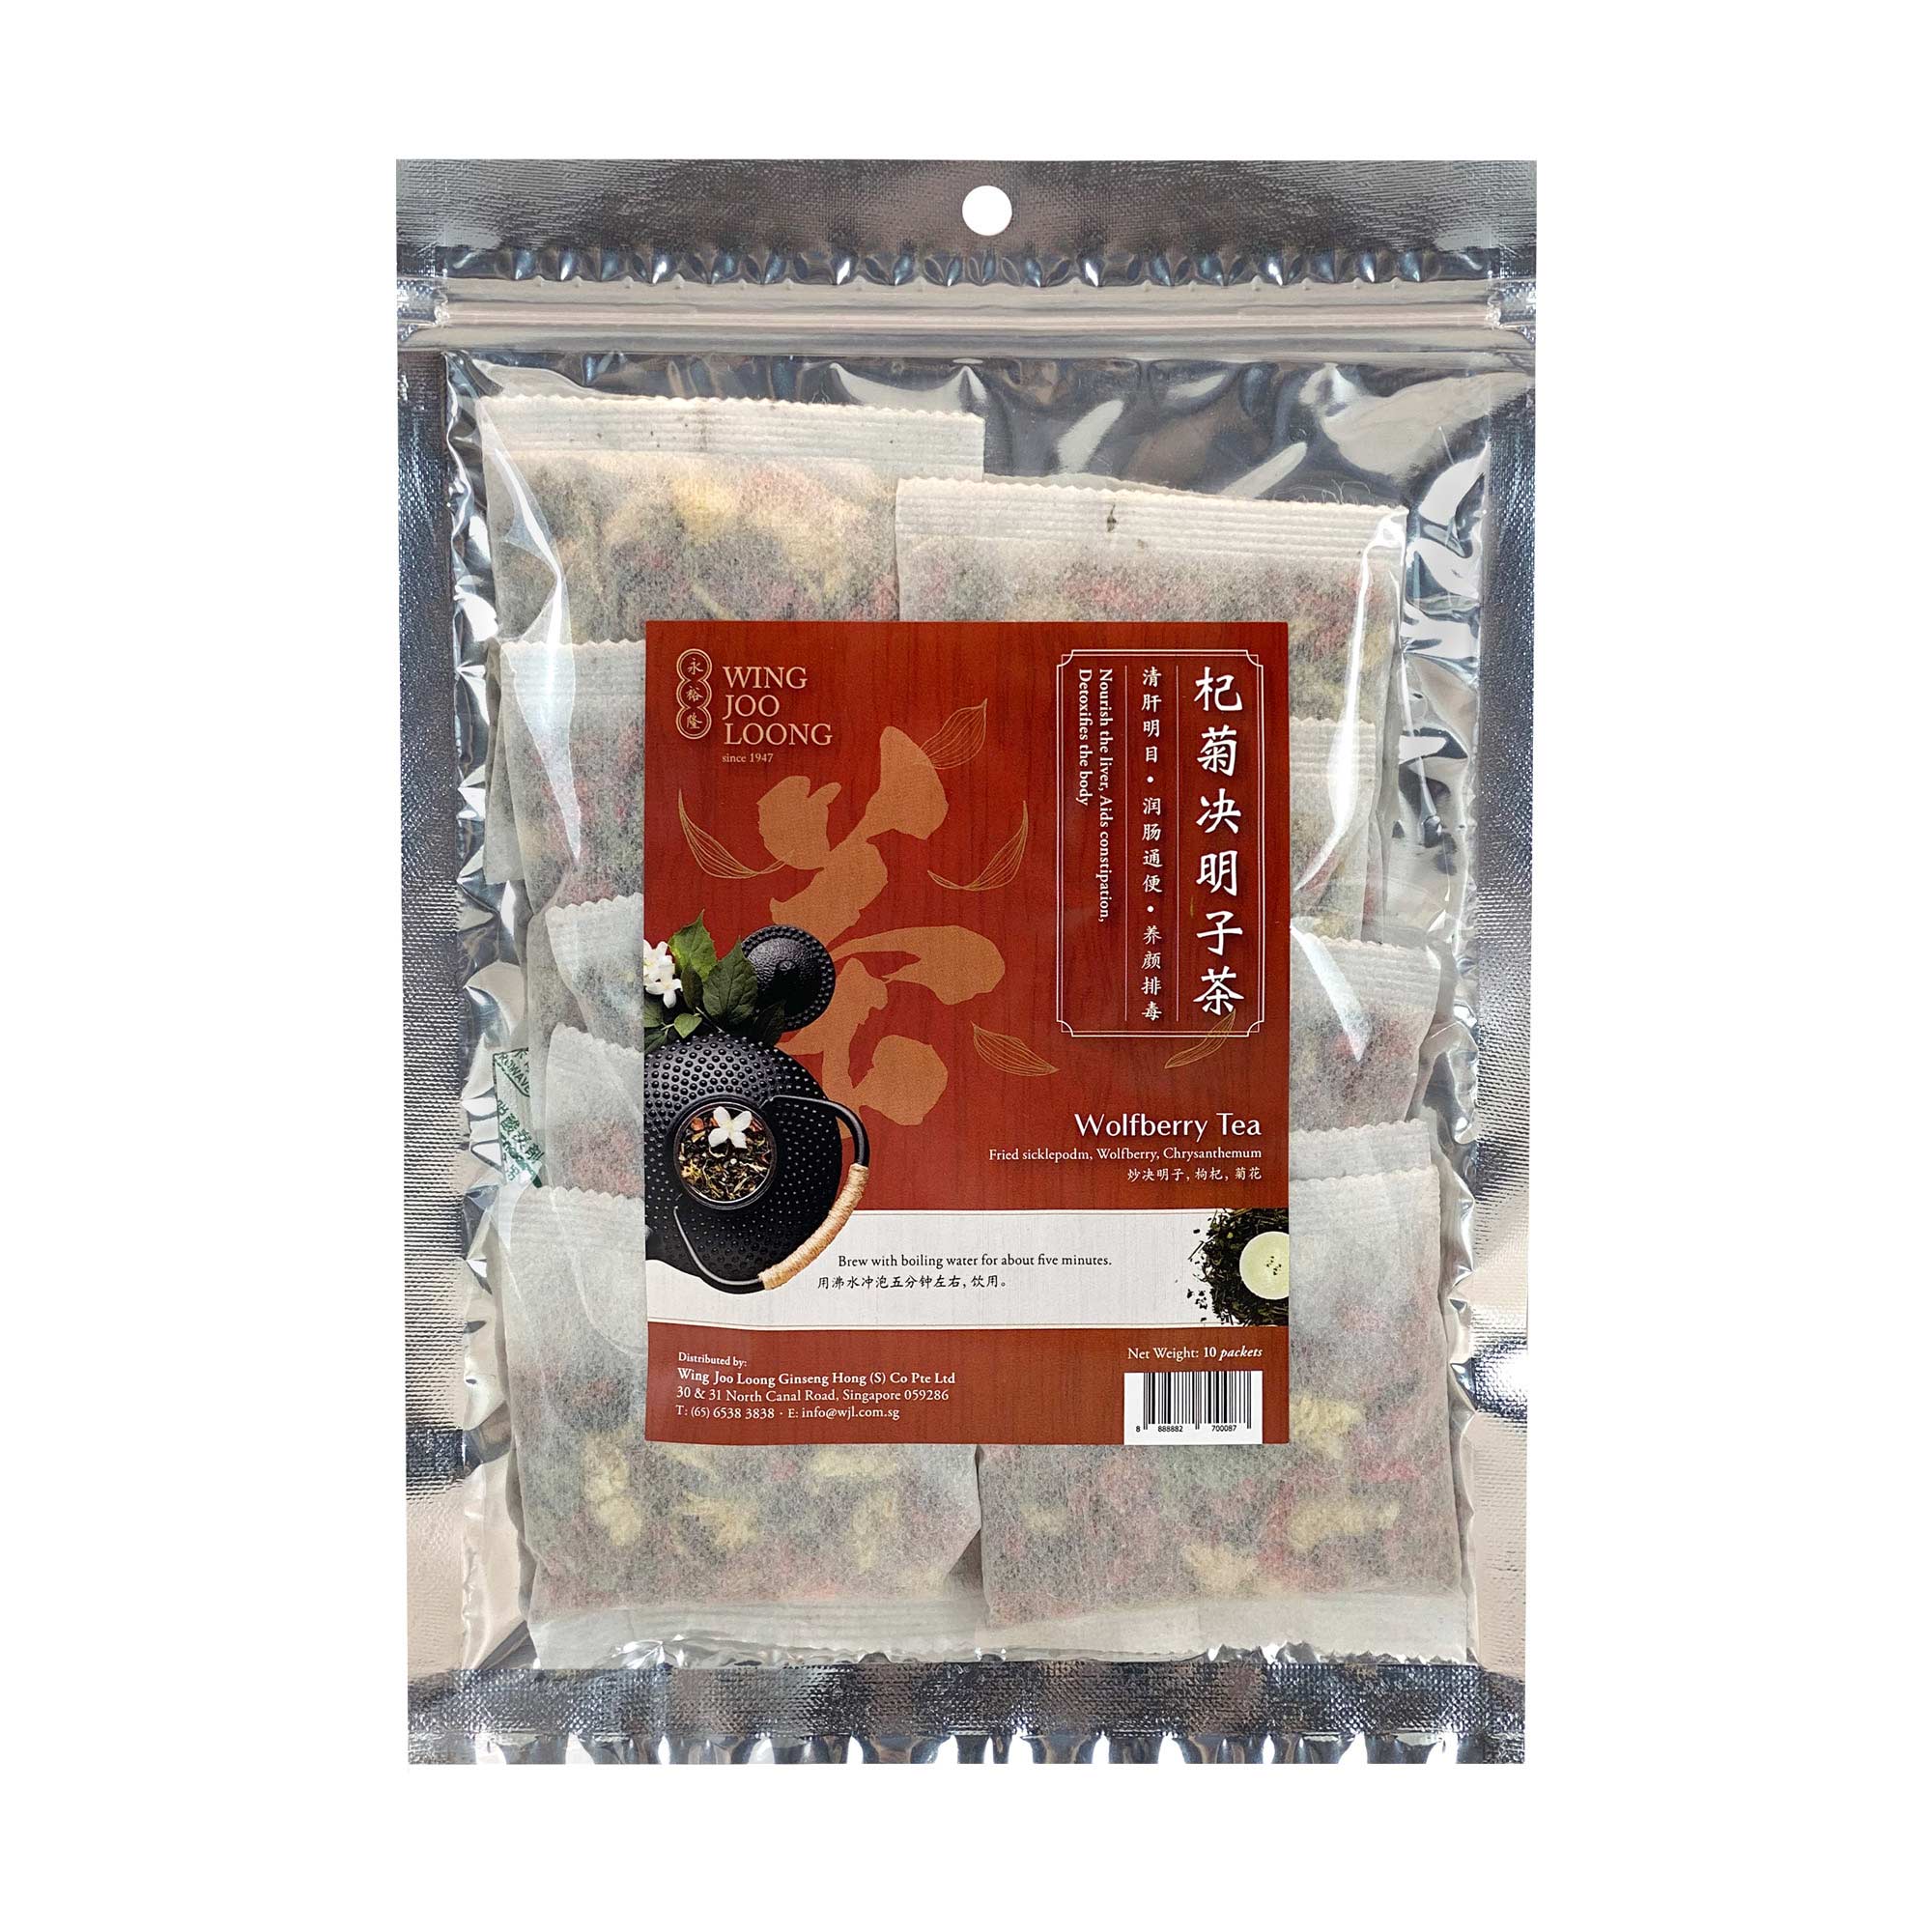 Wing Joo Loong Wolfberry Tea 枸菊决明子茶